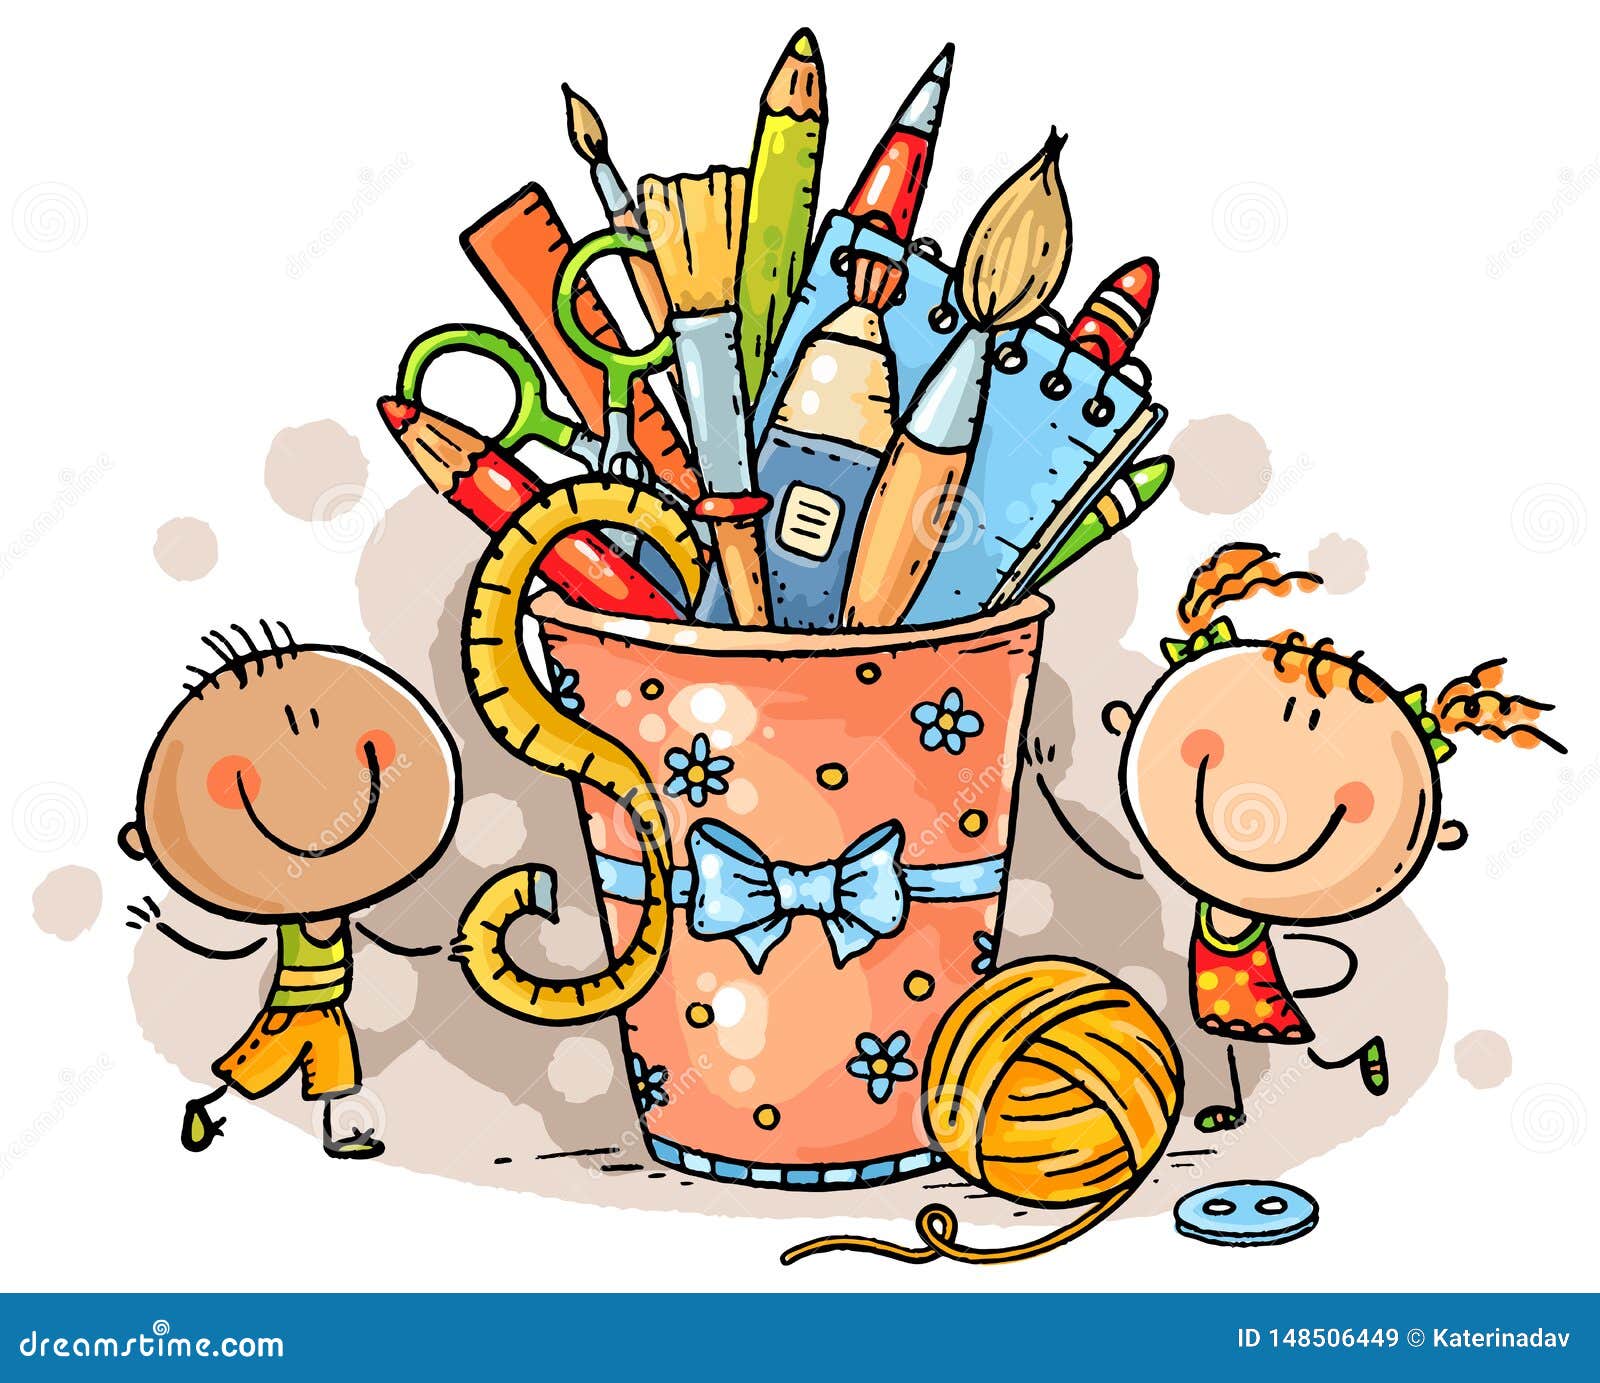 kids arts and crafts clipart